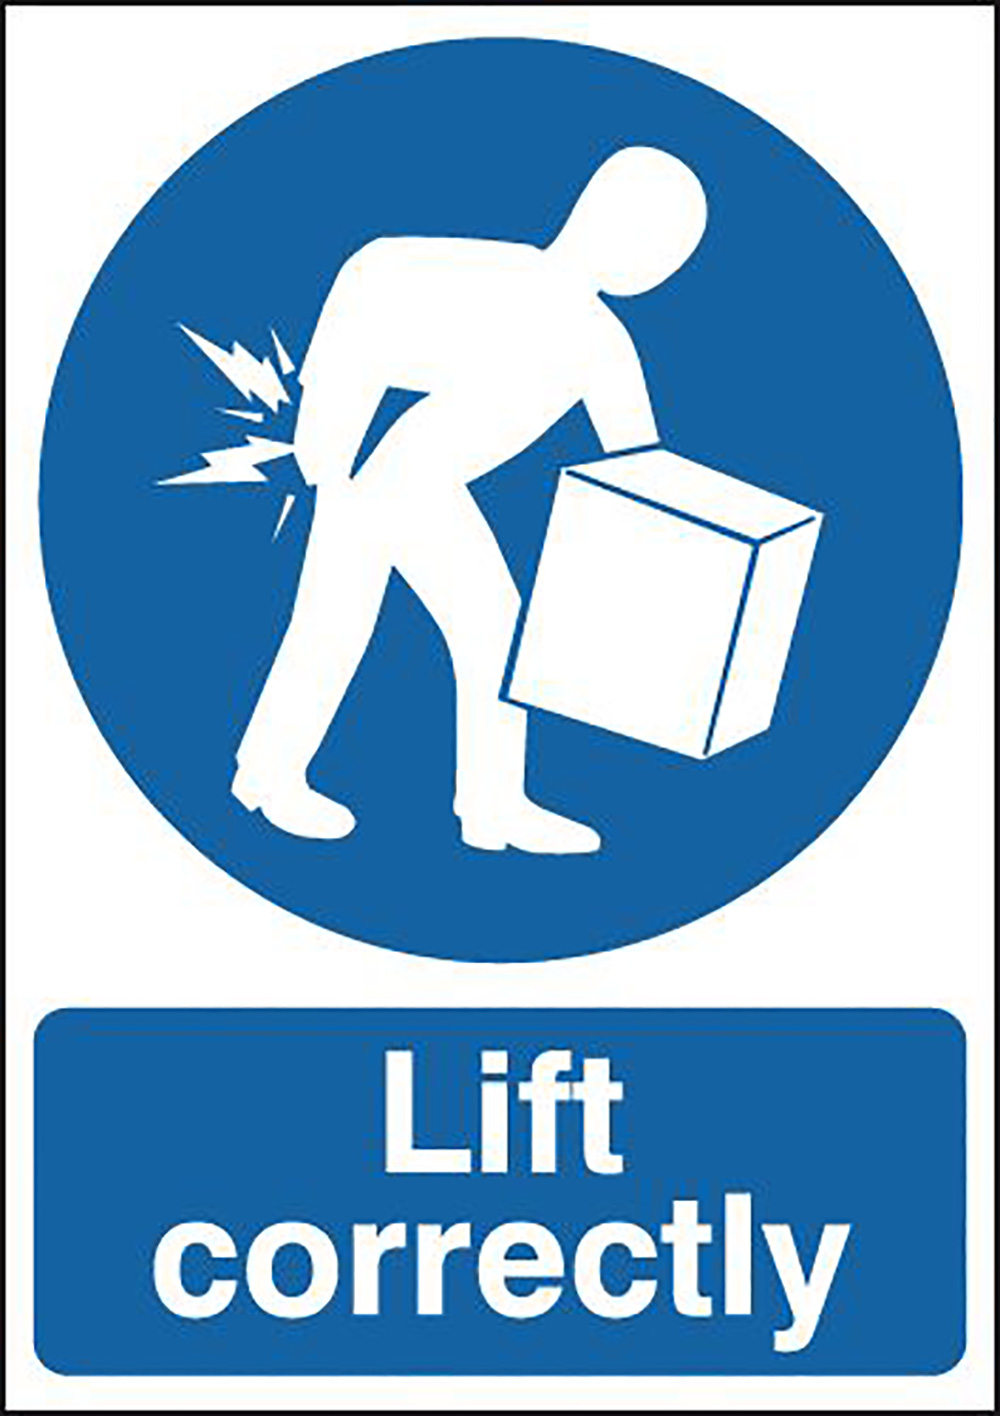 Lift Correctly  297x210mm 1.2mm Rigid Plastic Safety Sign  